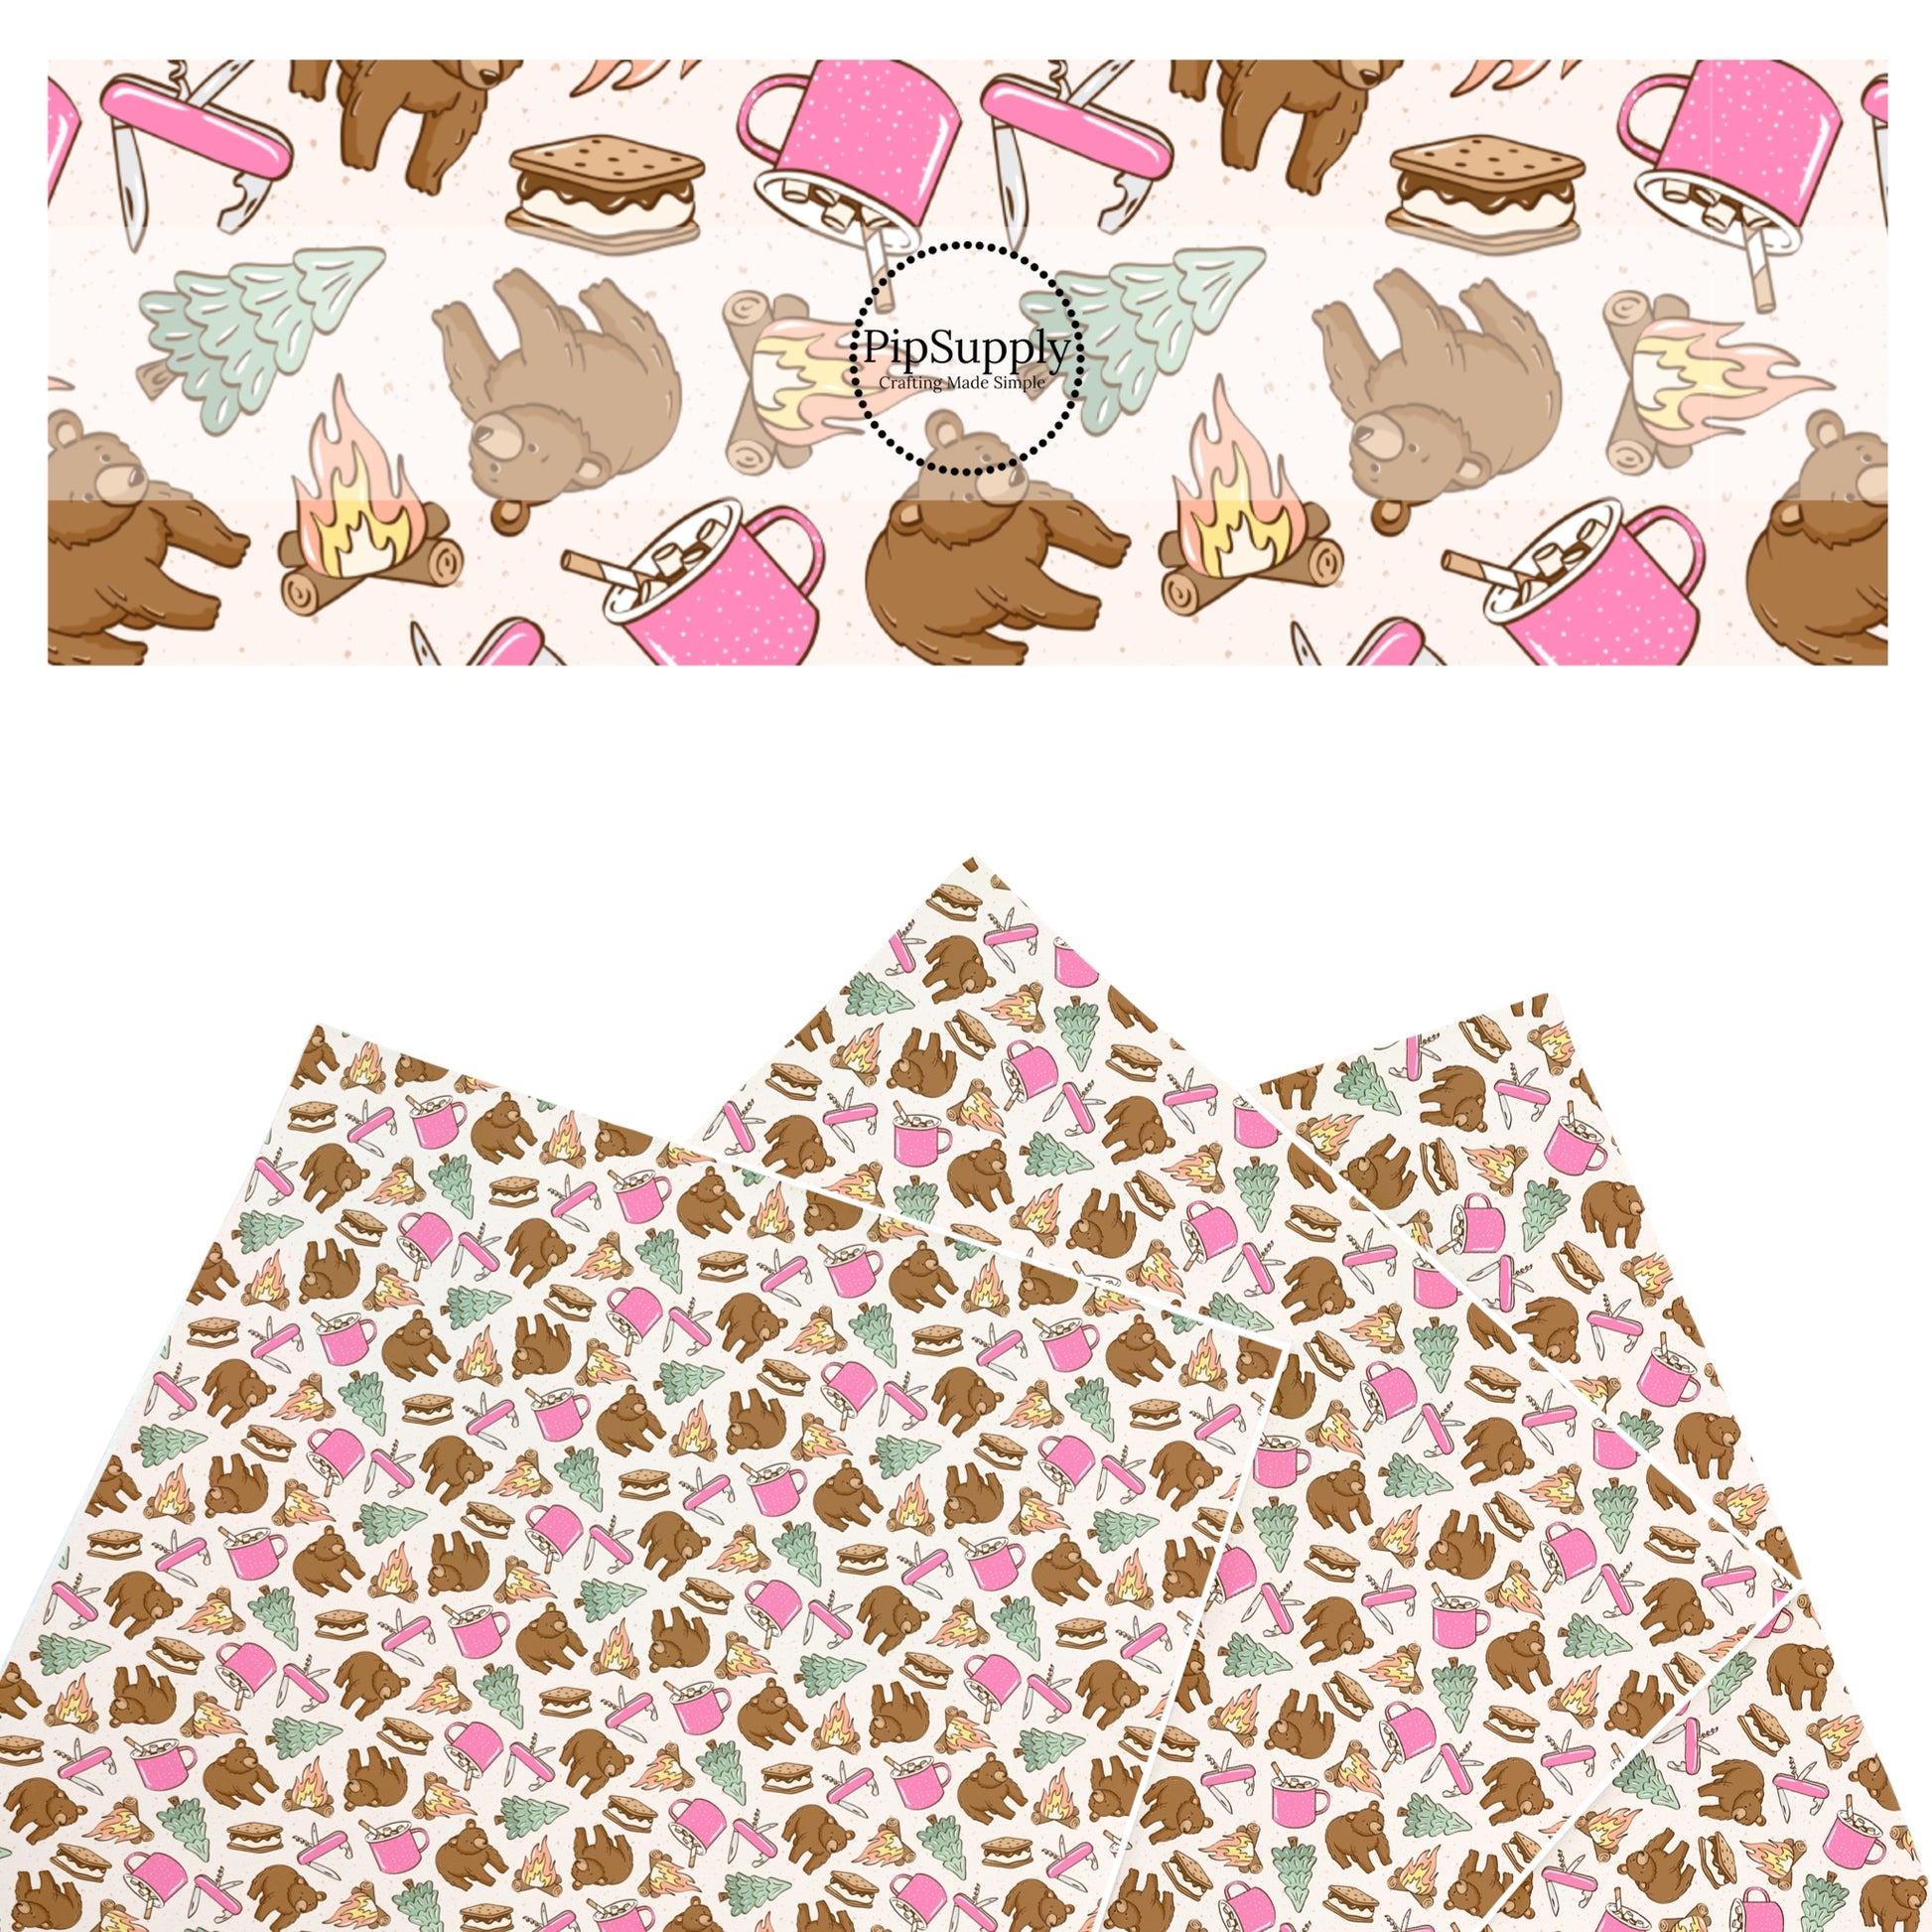 These summer faux leather sheets contain the following design elements: smores, hot cocoa, and brown bears. Our CPSIA compliant faux leather sheets or rolls can be used for all types of crafting projects. The designer of this pattern is Julie Storie Designs.